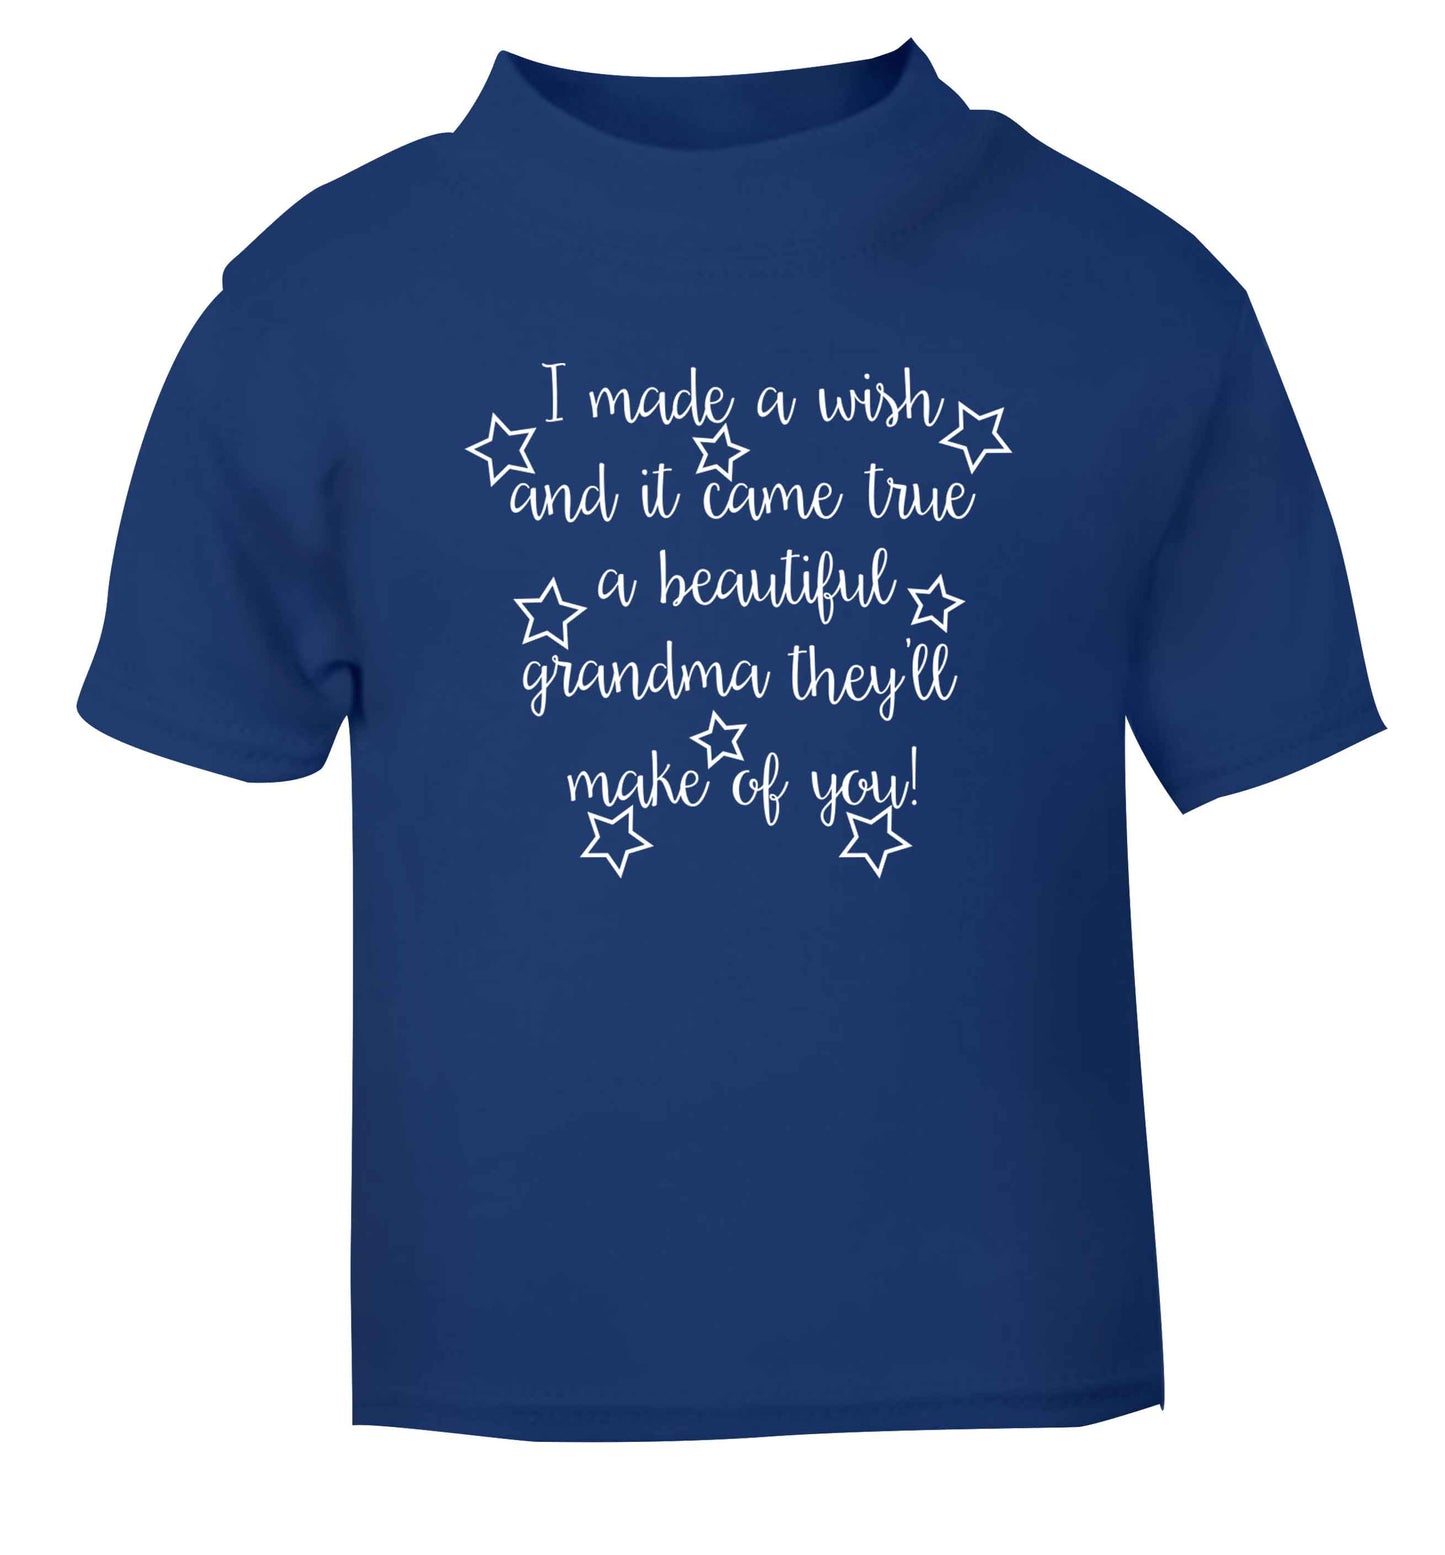 I made a wish and it came true a beautiful grandma they'll make of you! blue Baby Toddler Tshirt 2 Years